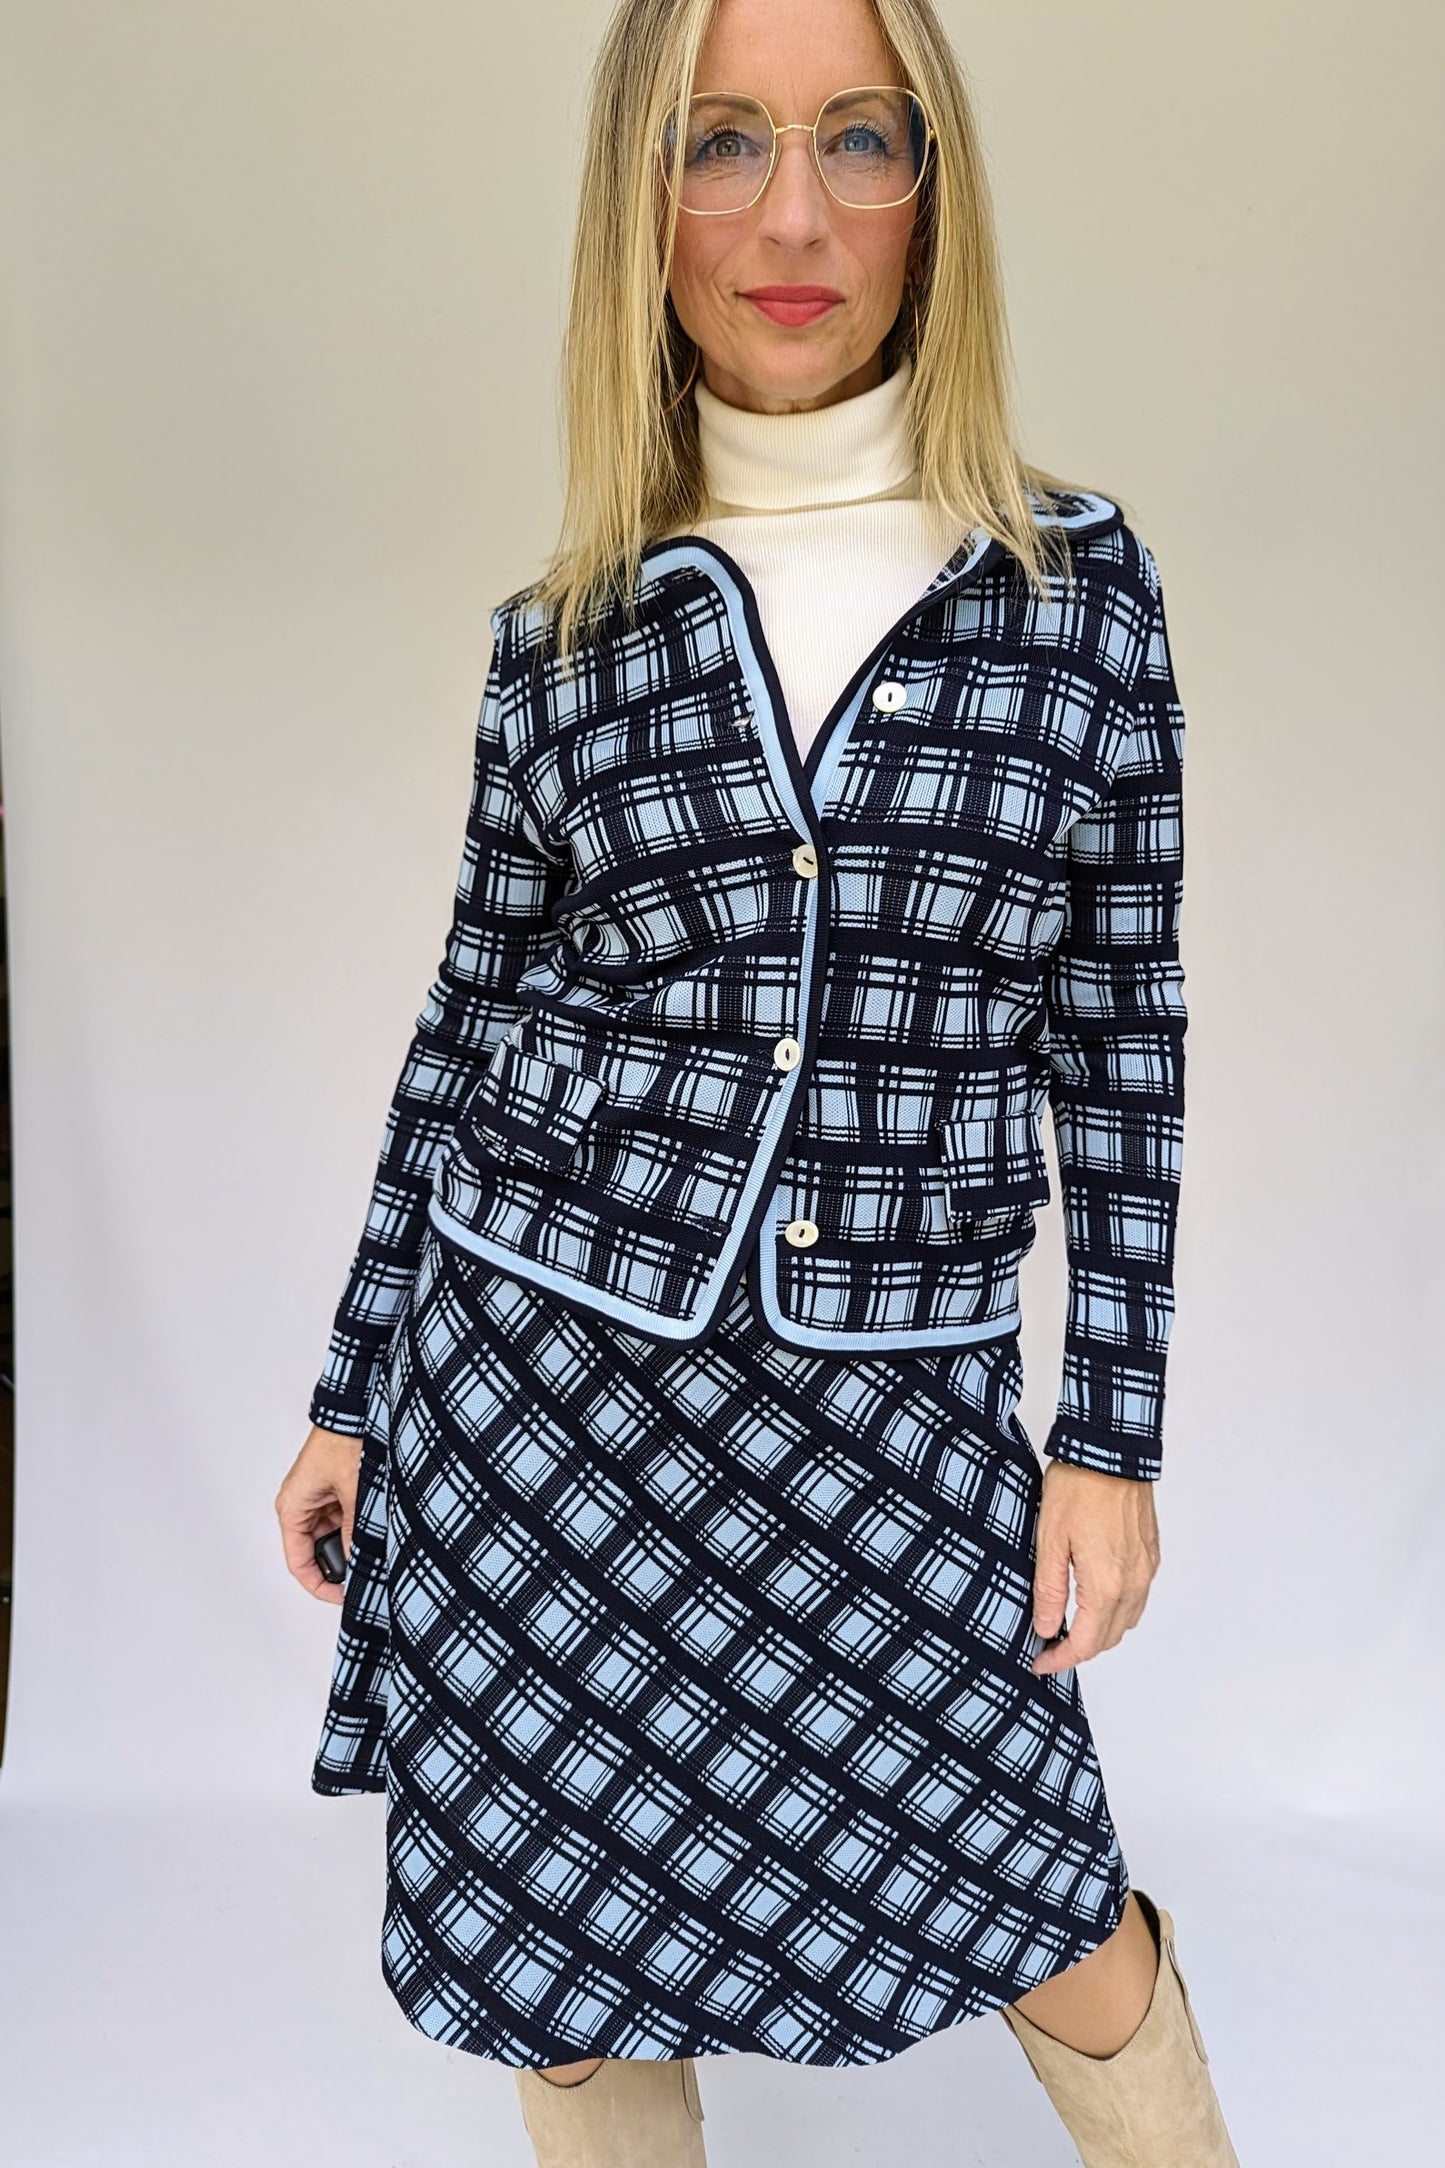 Buttoned Jacket and skirt 70s suit